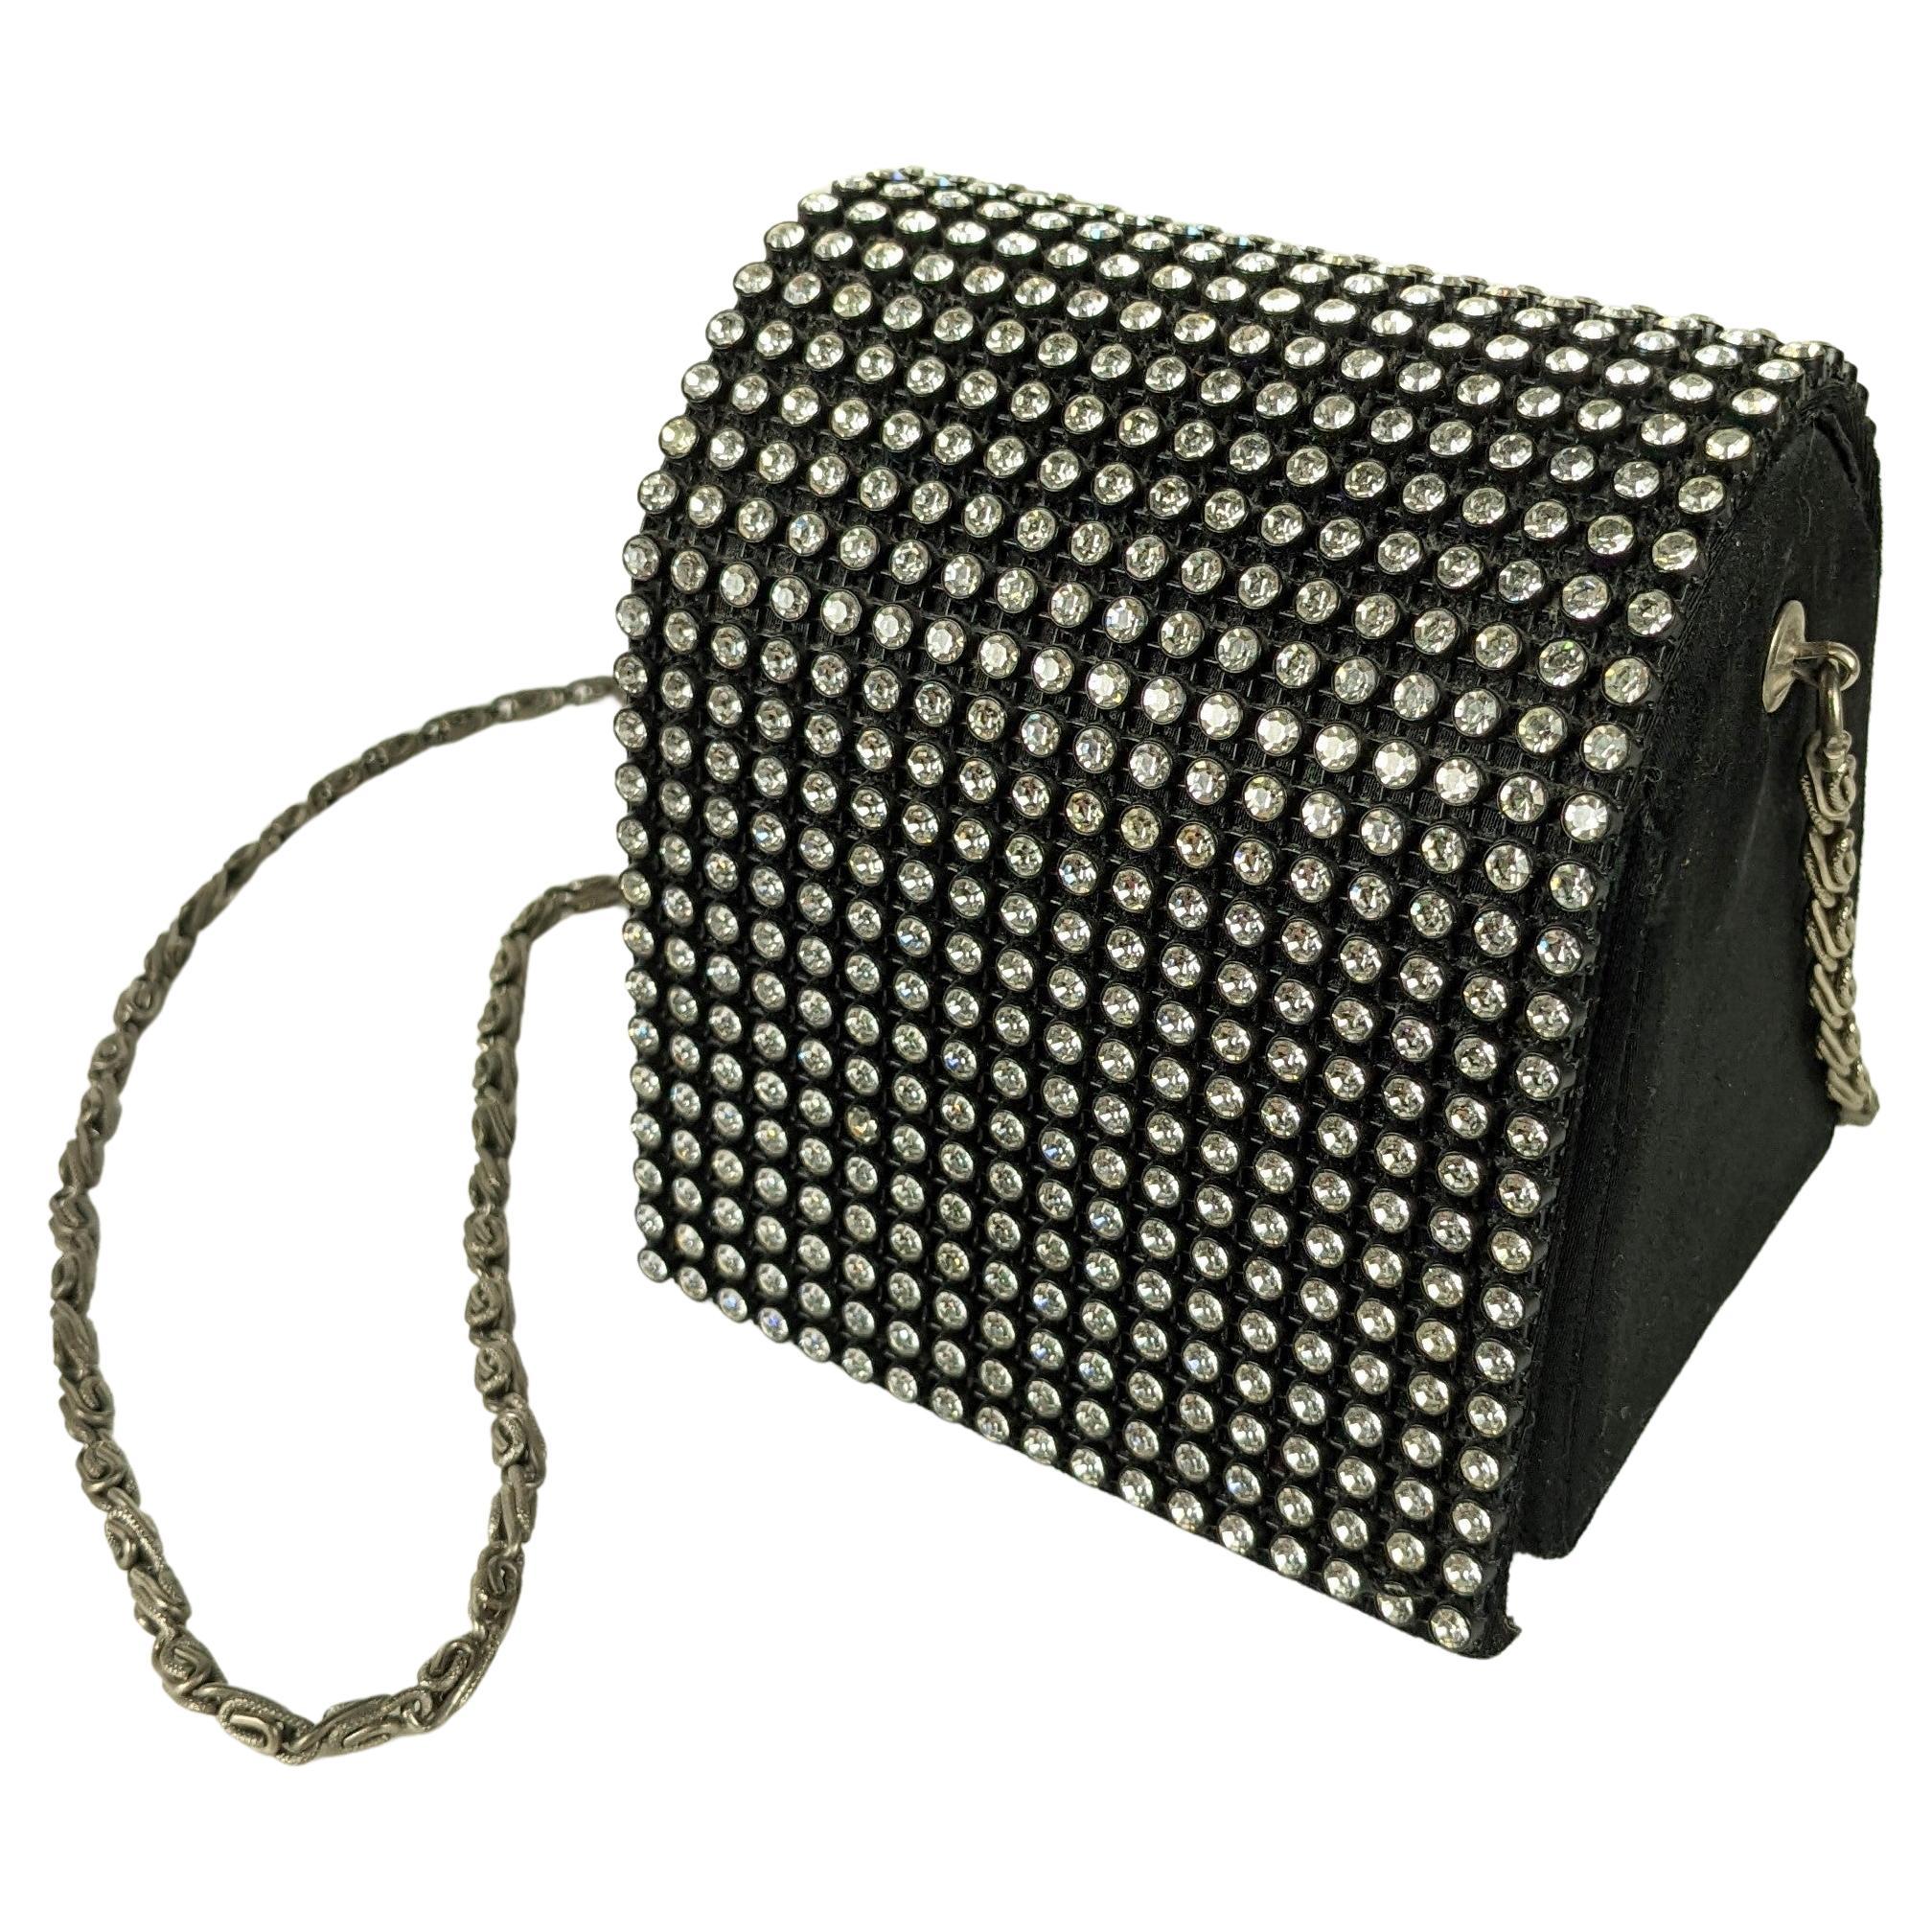 Arnold Scassi Pave Box Bag